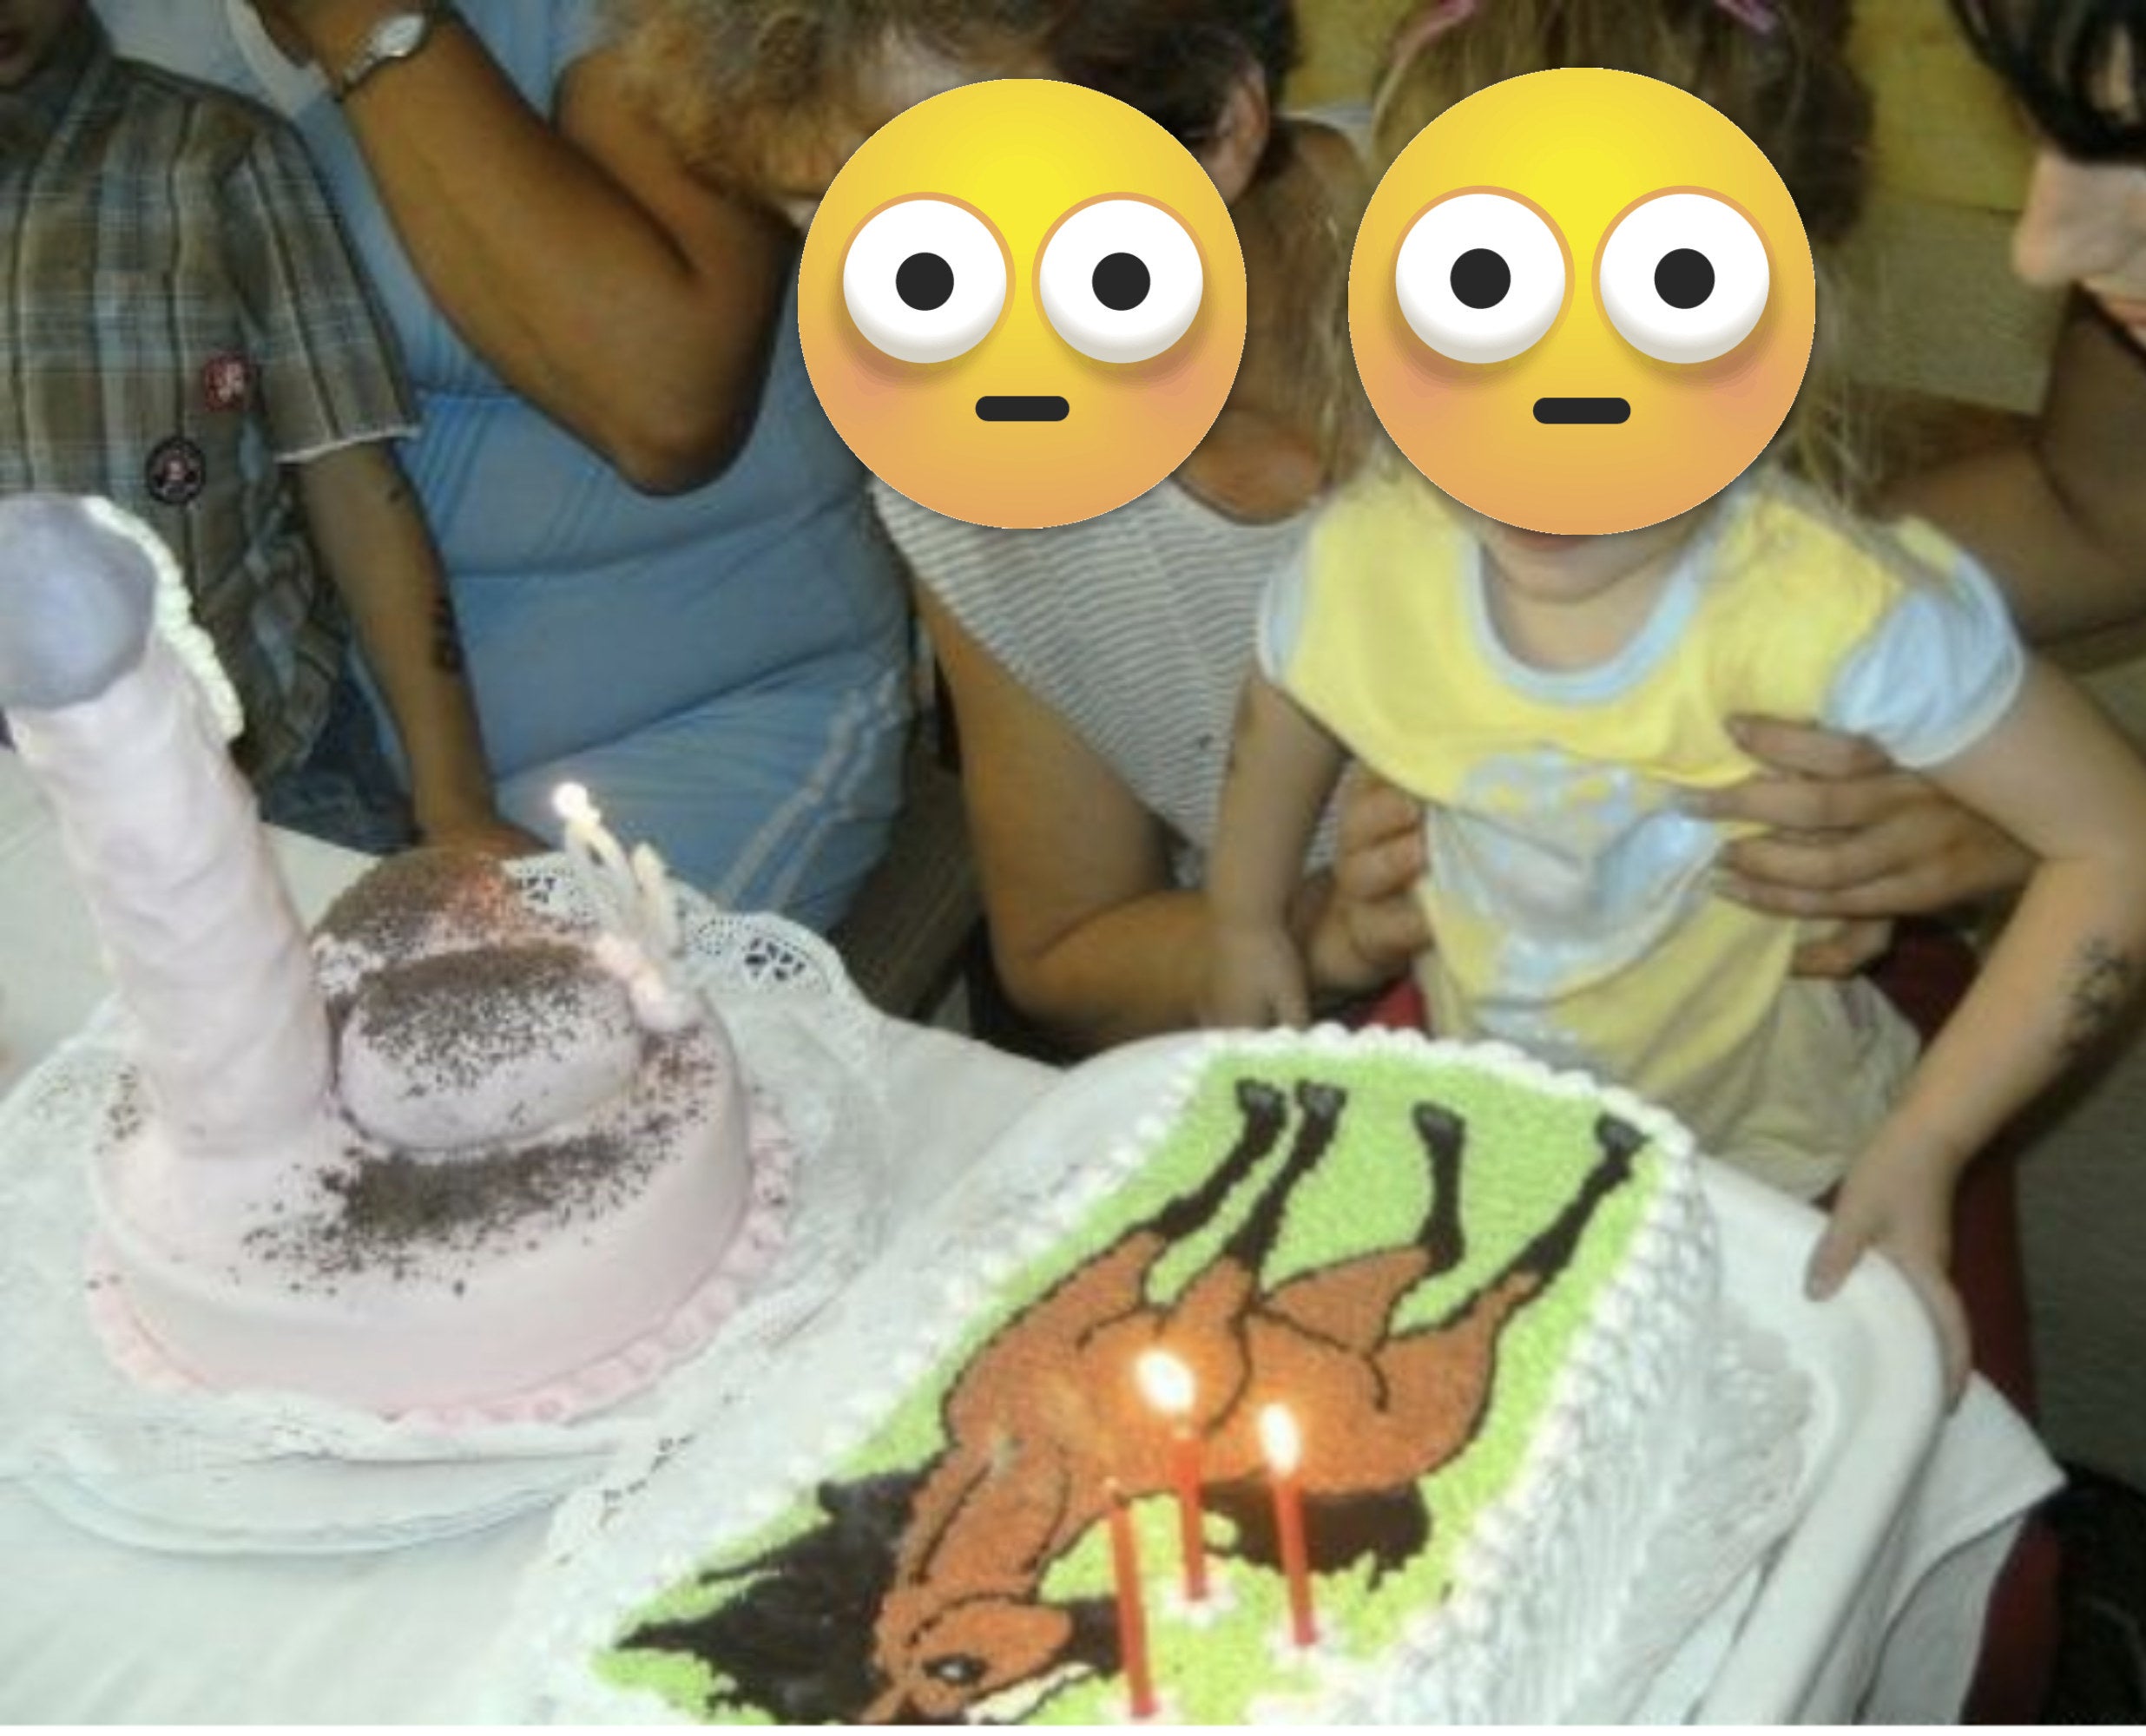 A very large erection cake next to a cake with a horse drawn on it, as someone holds up a little girl to blow out the candles on the horse cake